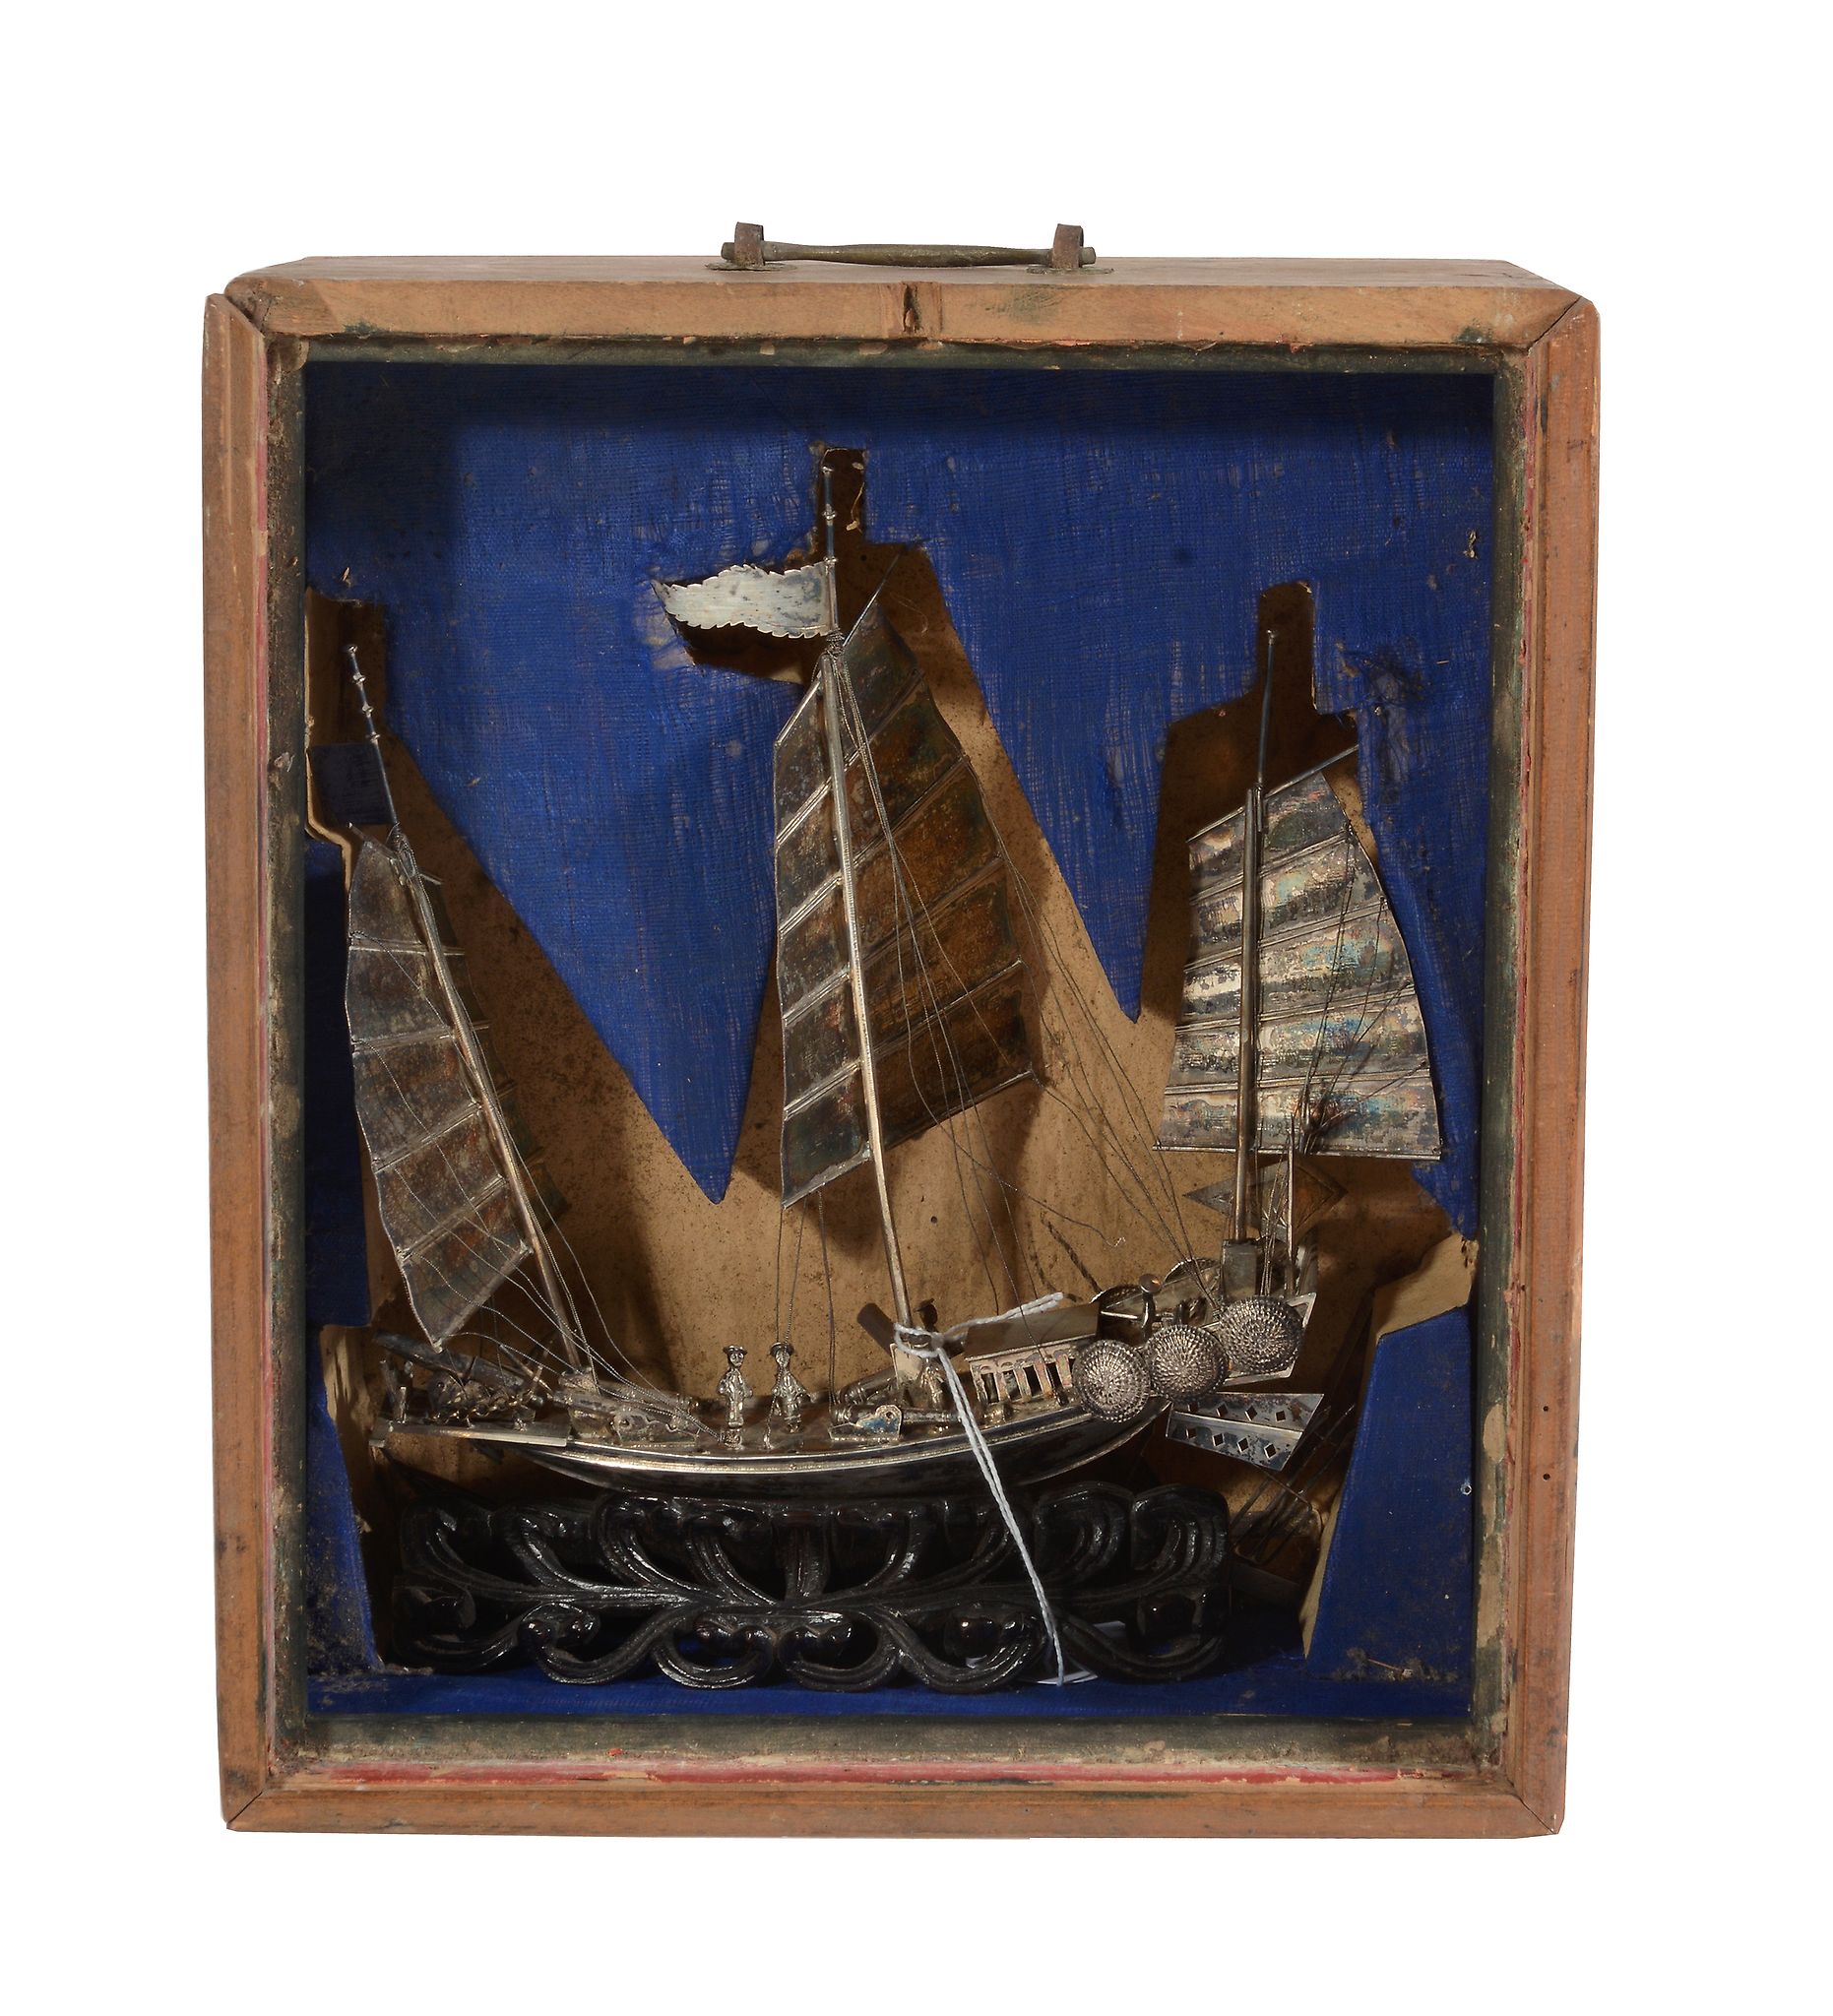 A Chinese export silver model of a sailing junk or warship, by Luen Hing A Chinese export silver